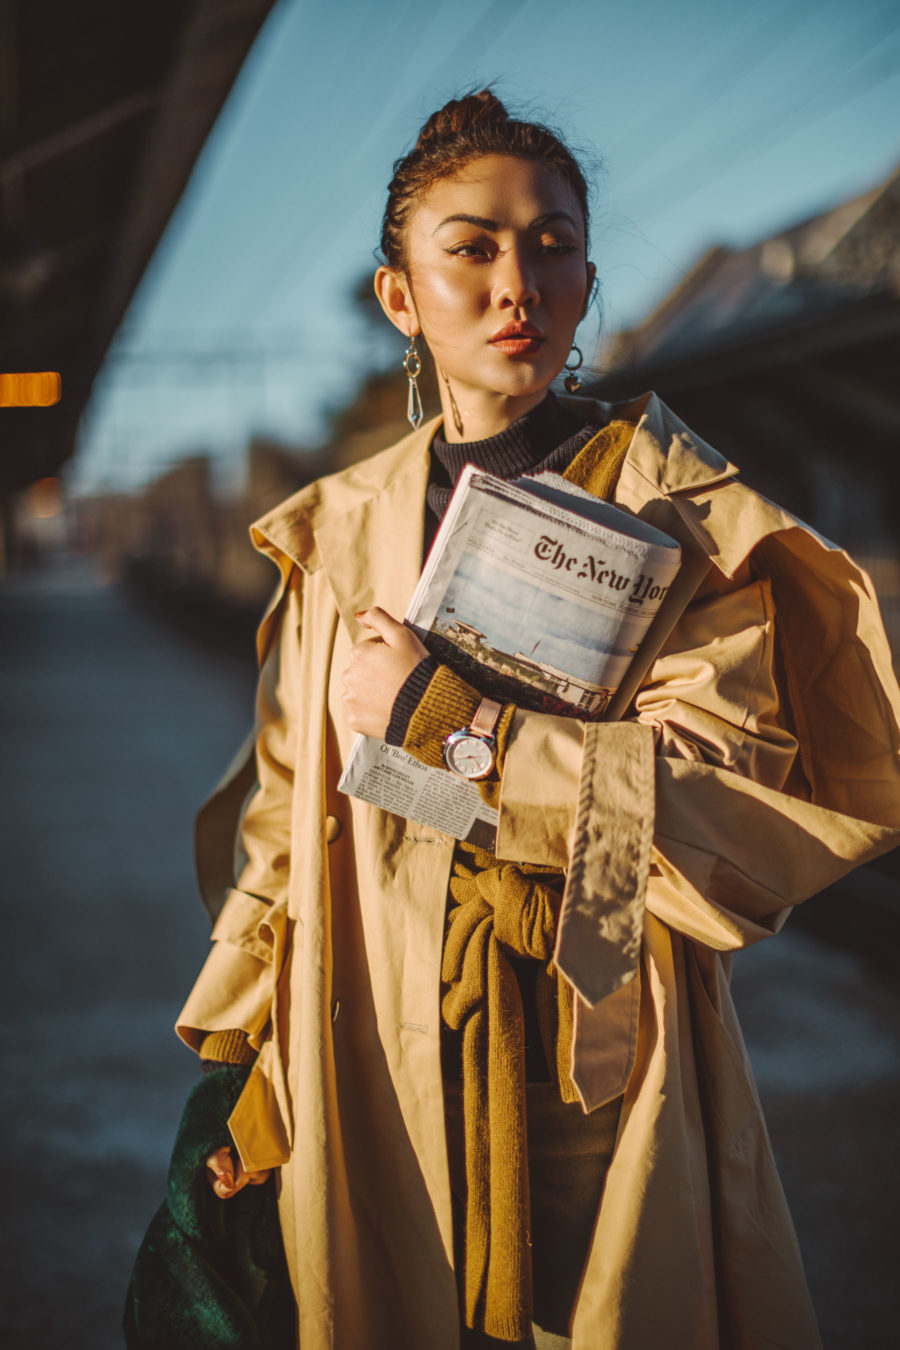 biggest blogging trends of 2019, Cozy Layered looks, jessica wang, fashion blogger, new york fashion blogger, street style fashion, ootd, asian blogger, oversized trench coat, leather band watch, layered style // Notjessfashion.com